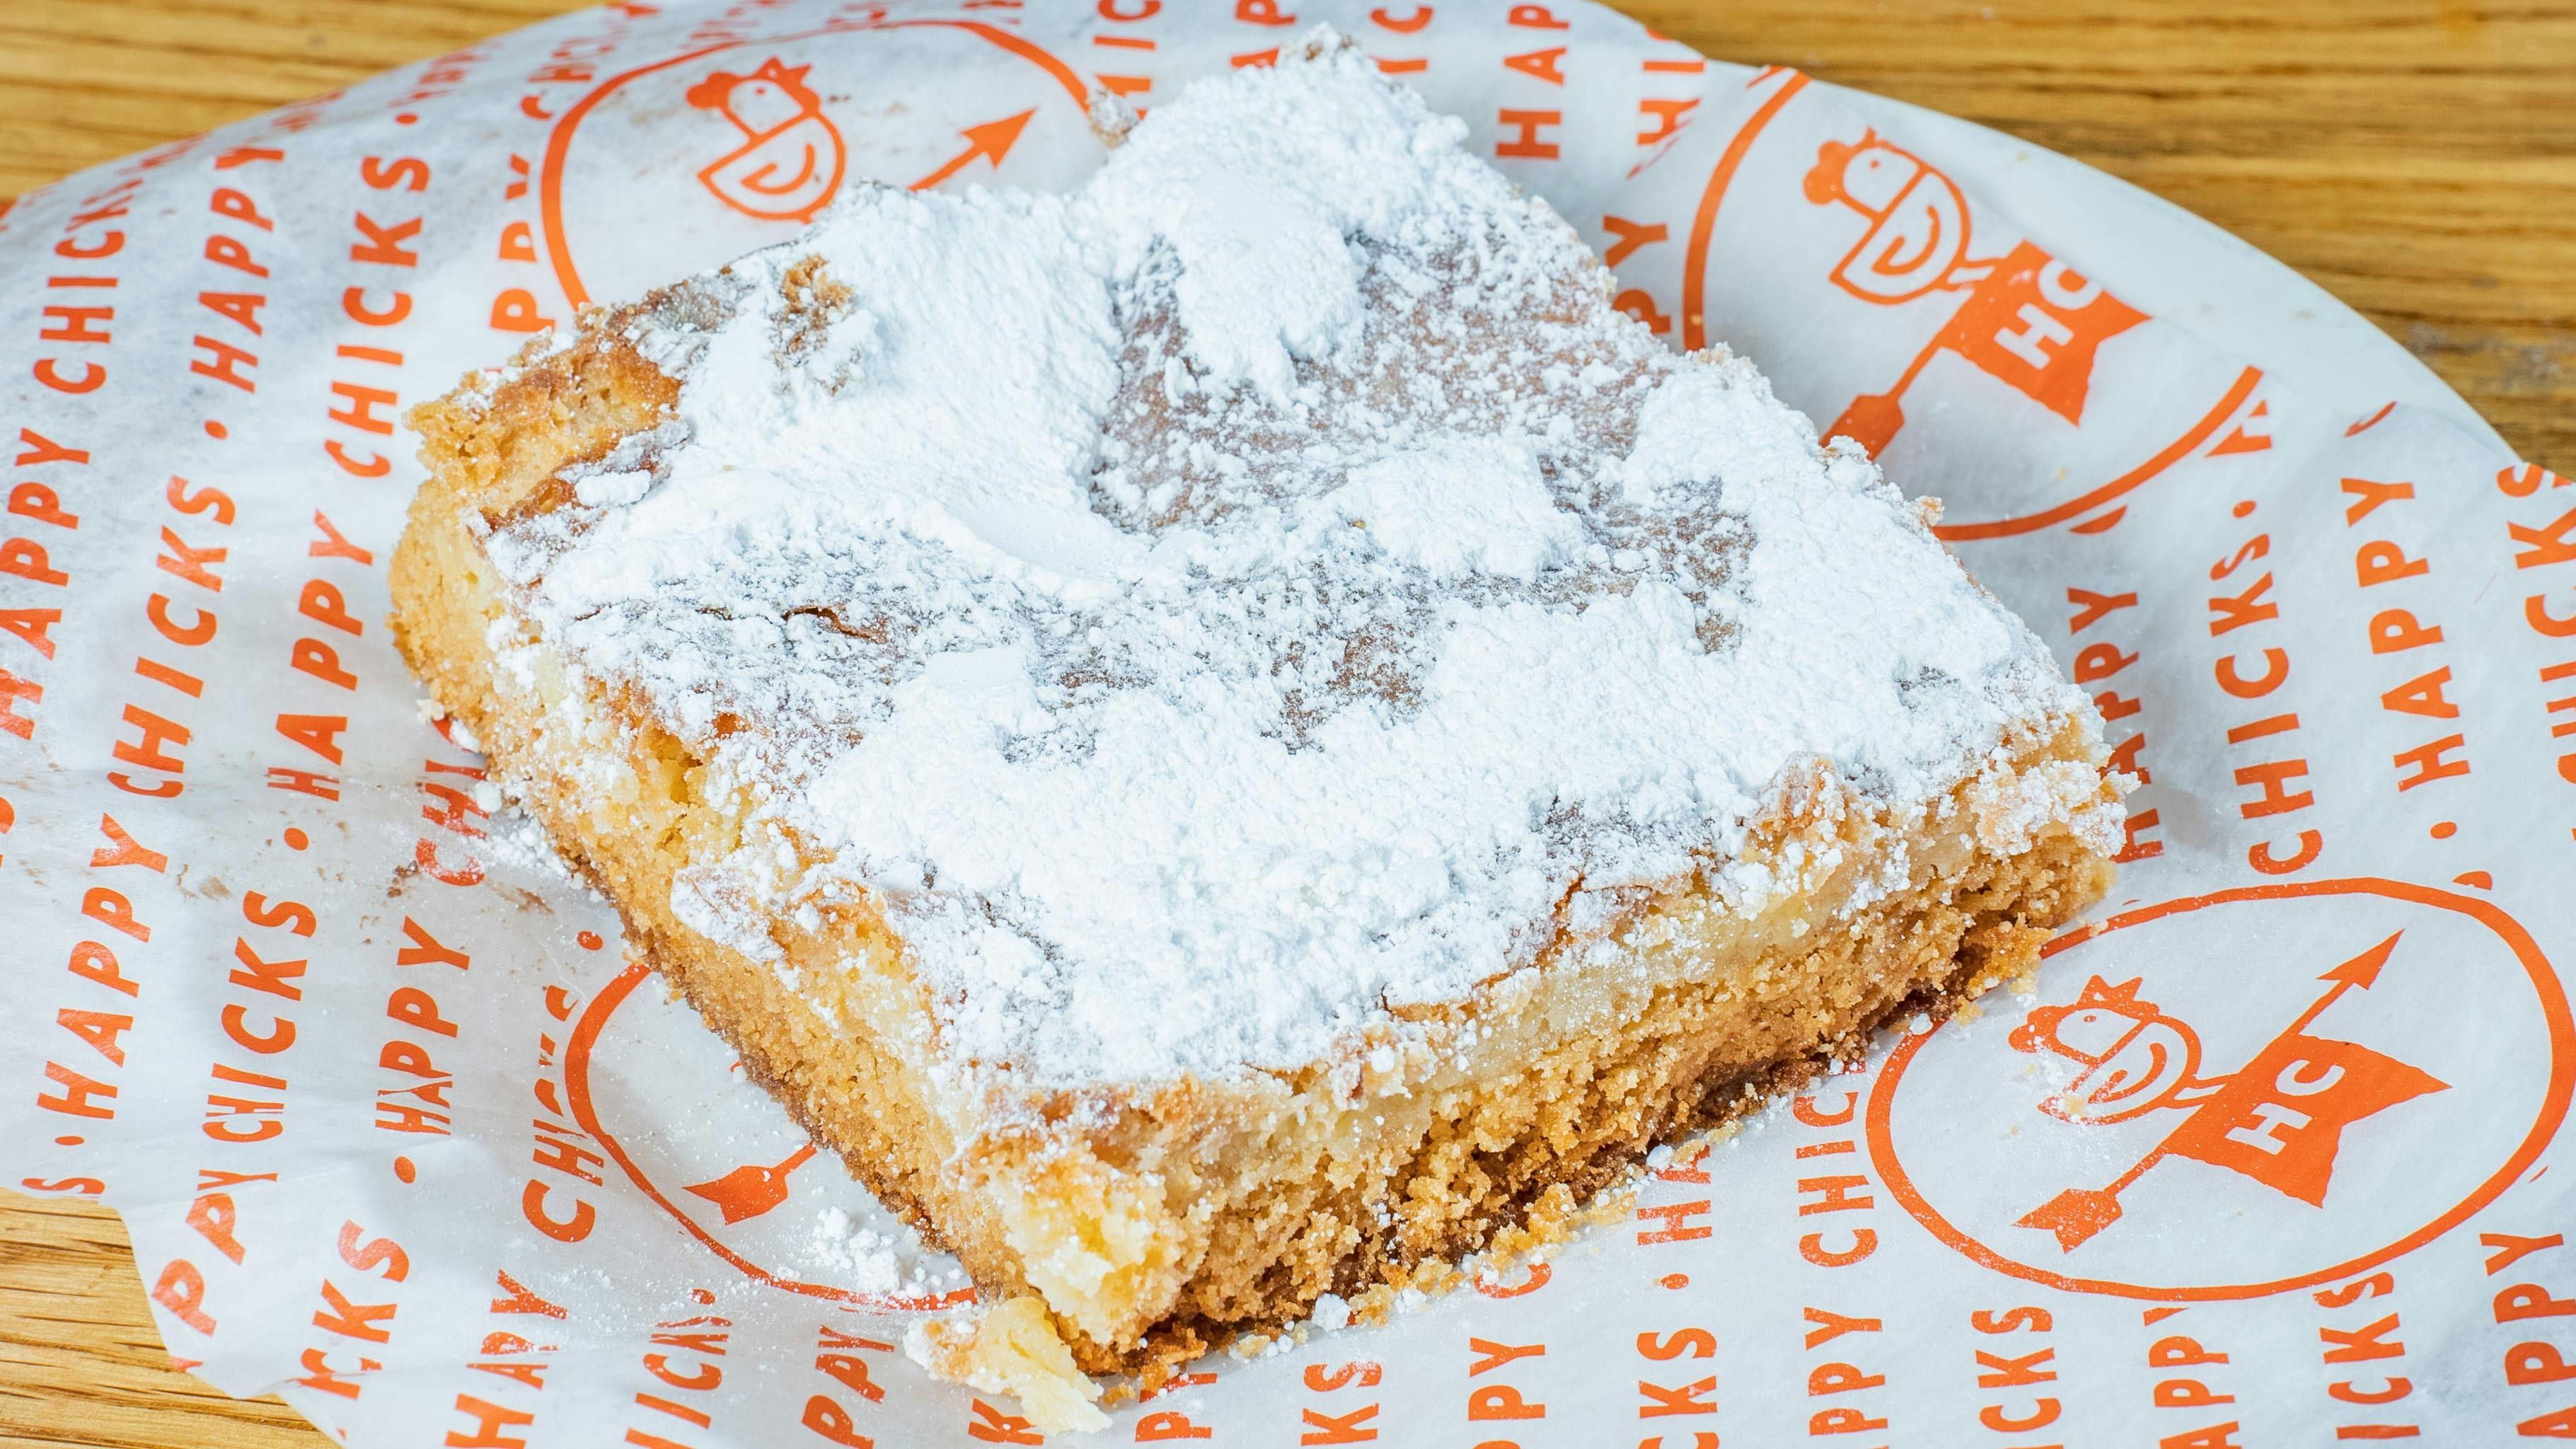 Gooey Butter Cake from Happy Chicks - East 6th St in Austin, TX